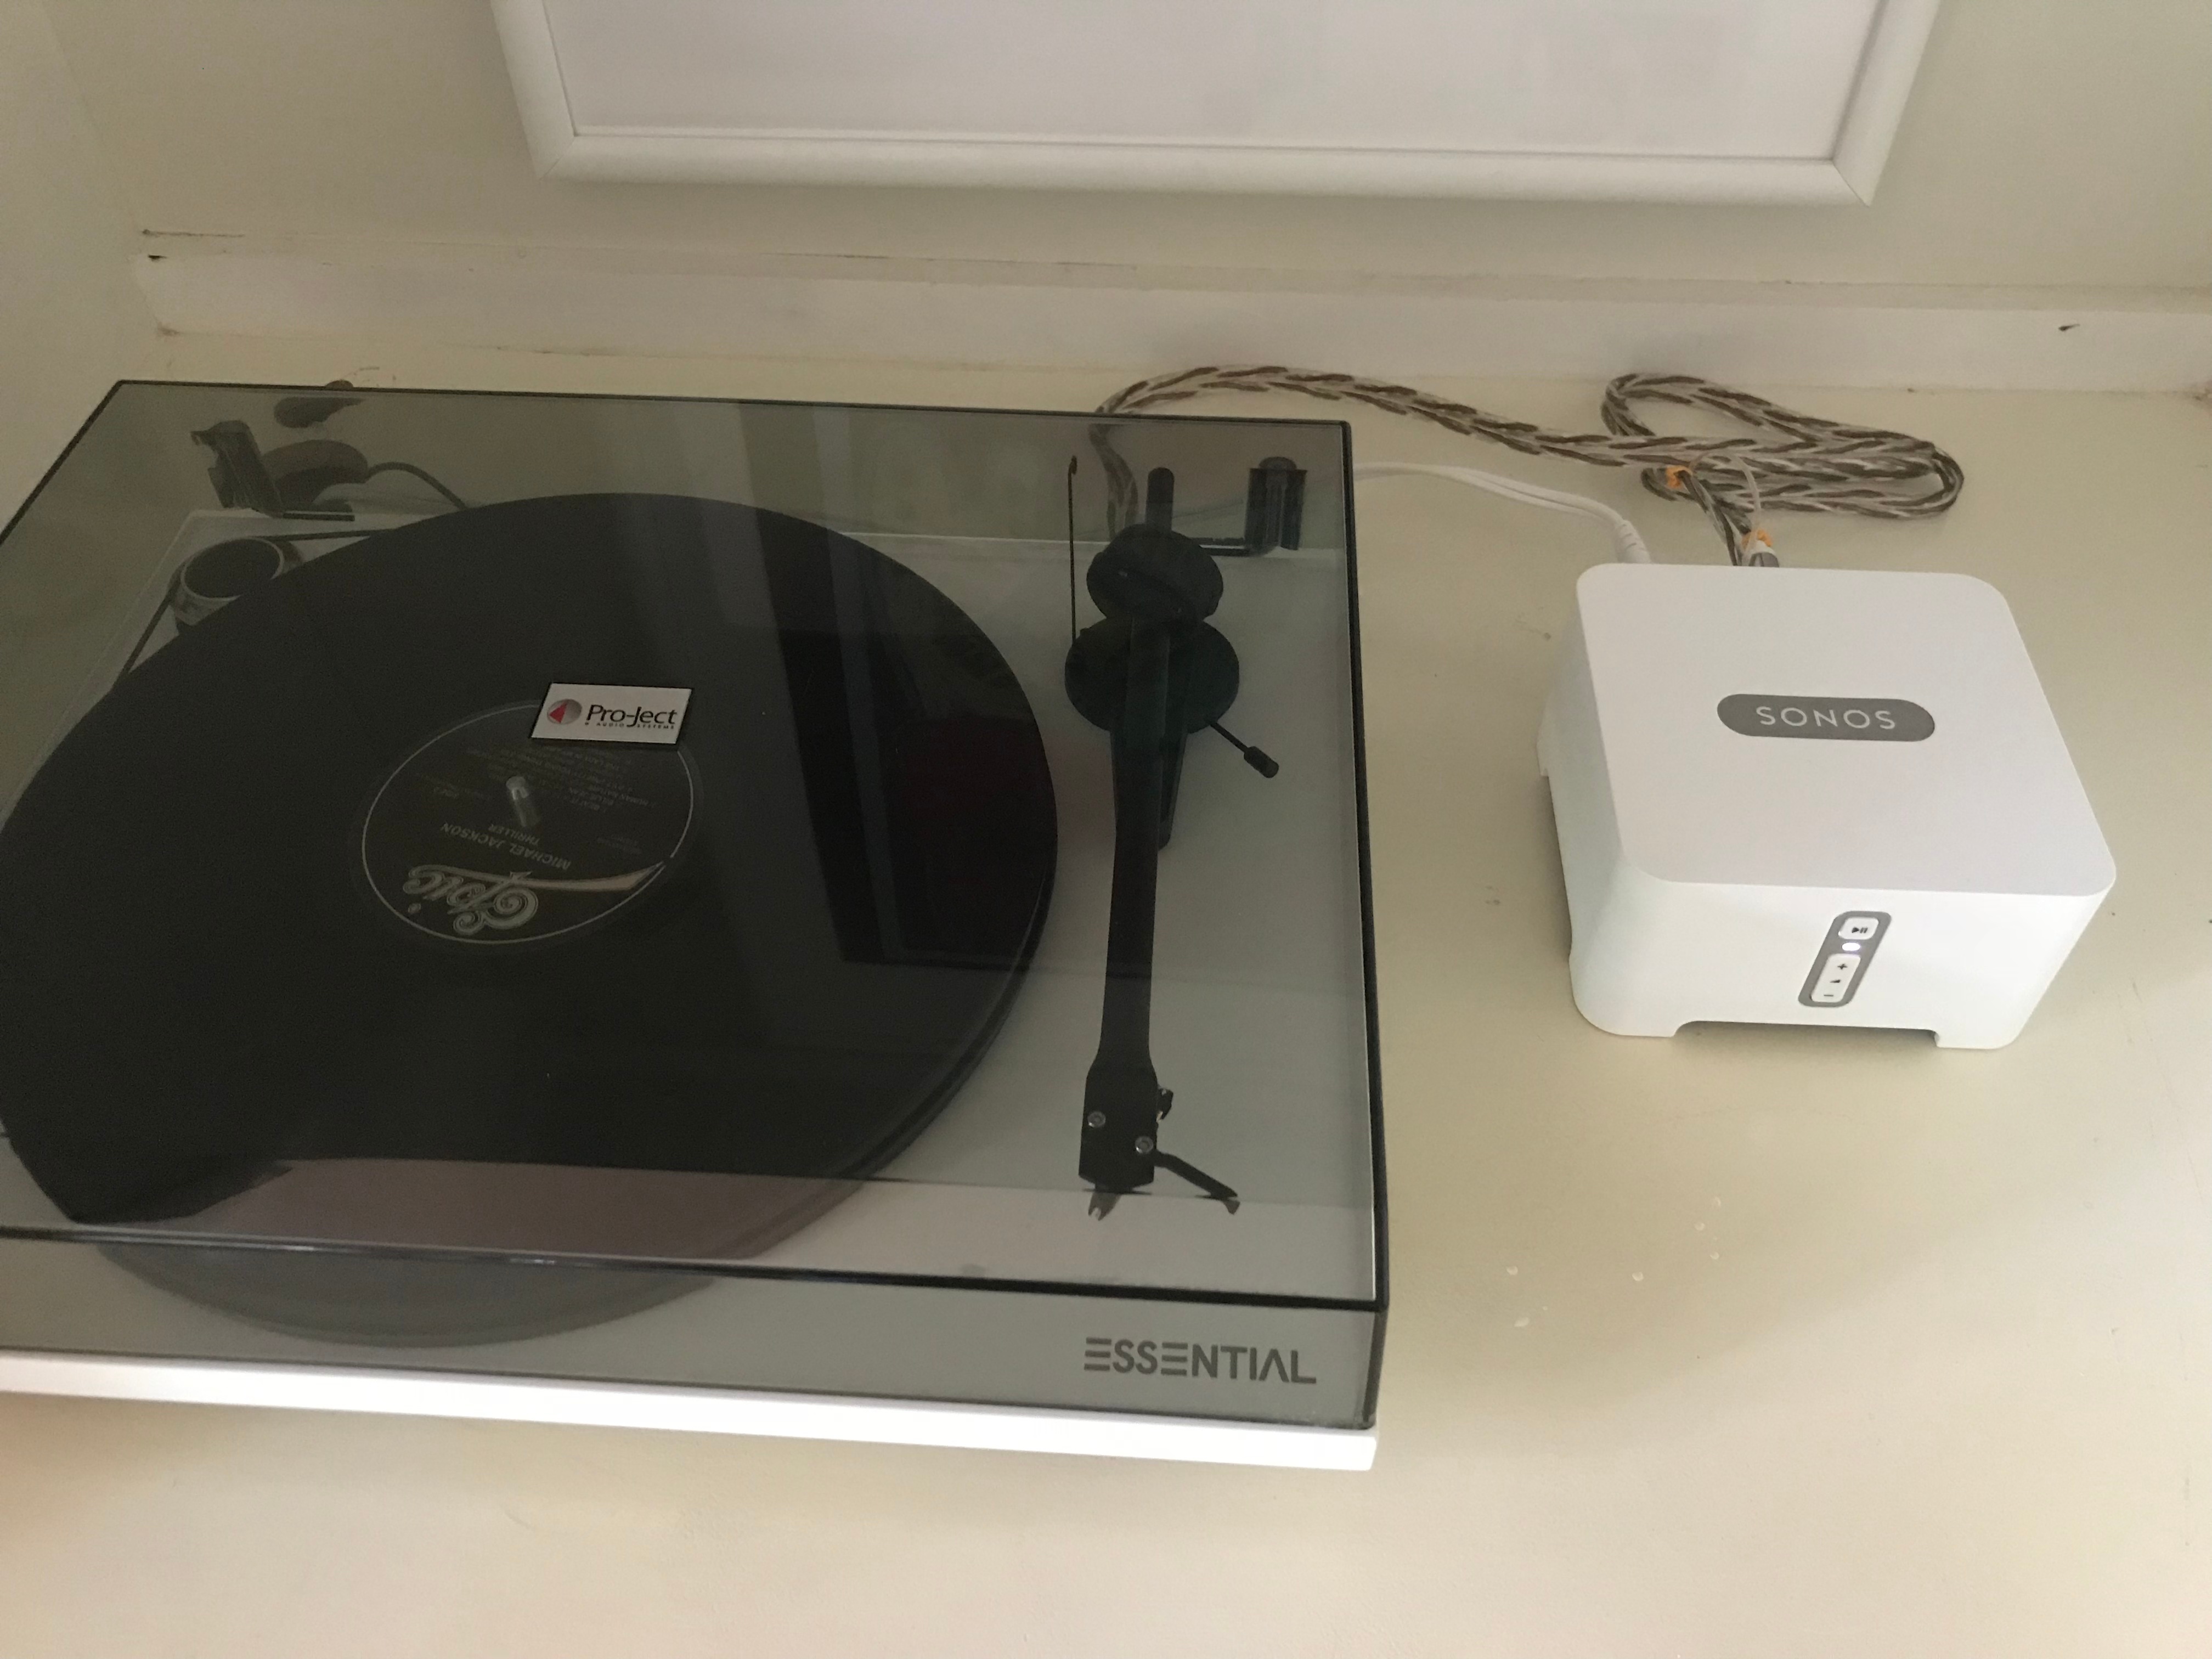 turntable for sonos system